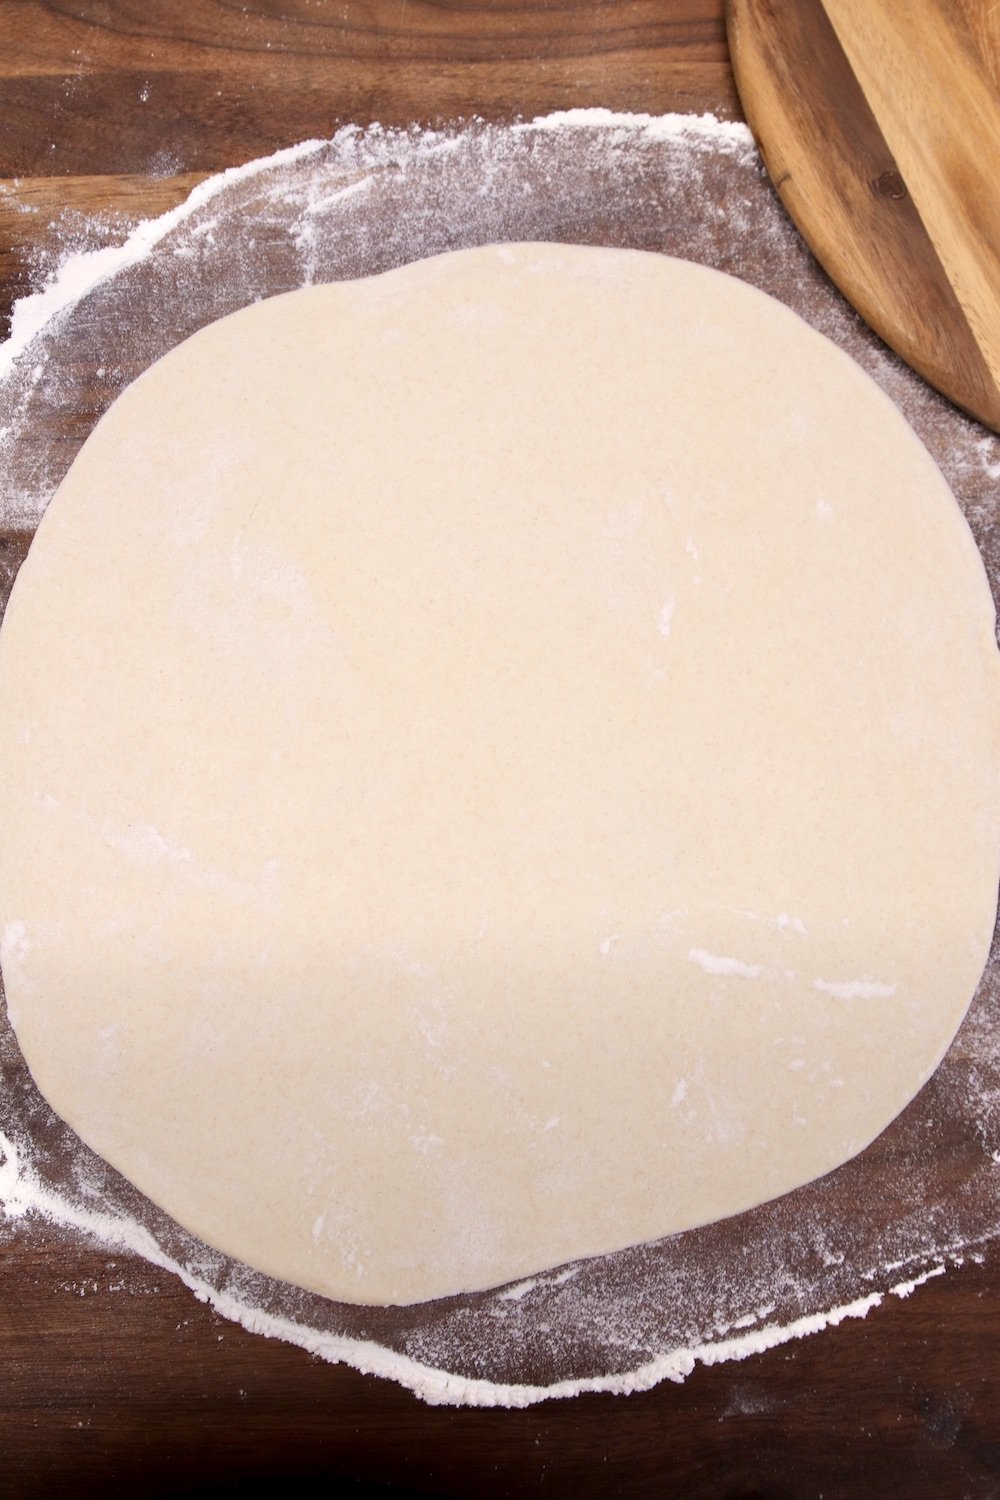 Pizza dough on a floured board - rolled into a circle